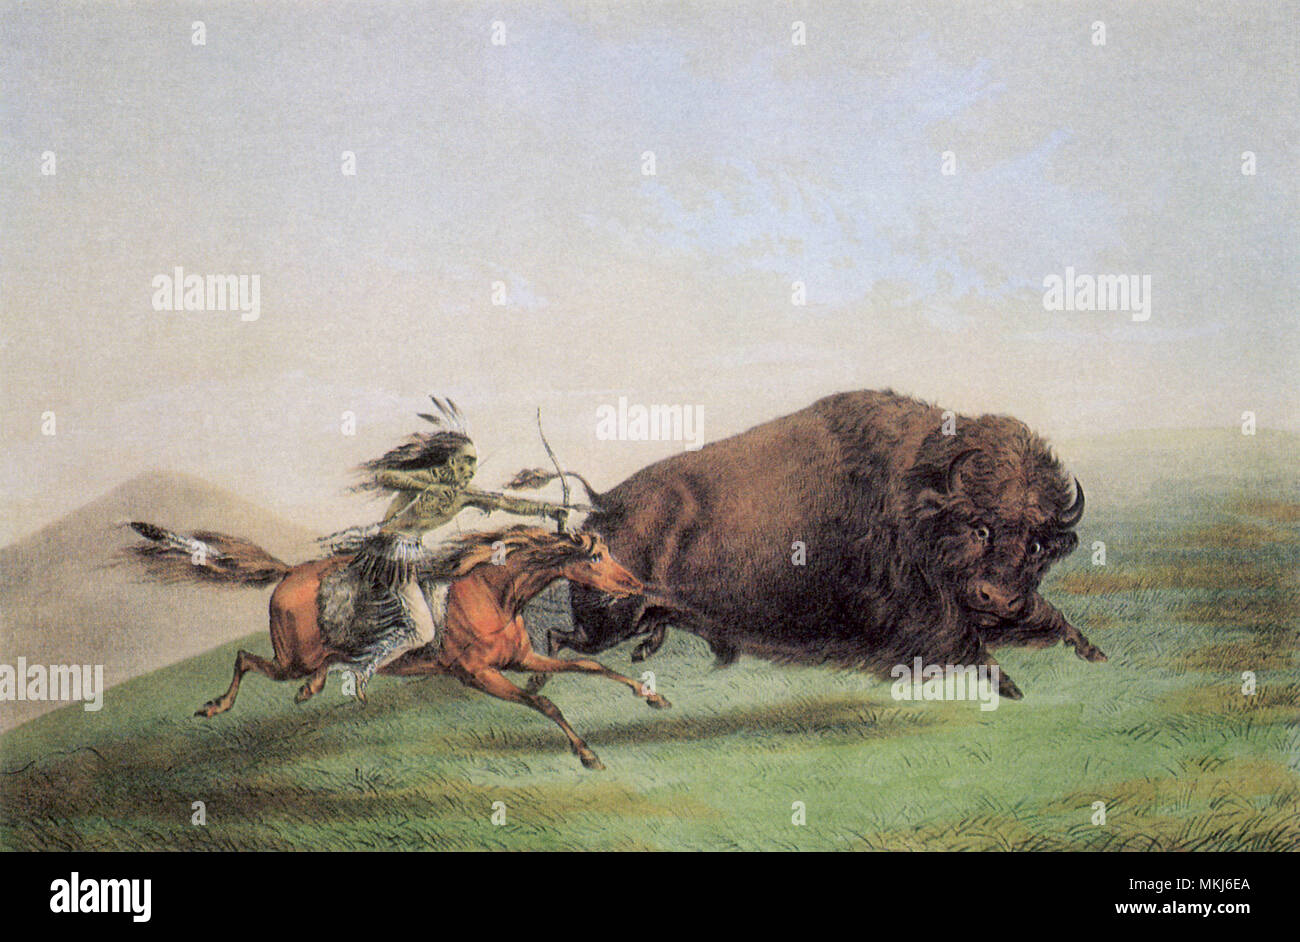 why was the buffalo important to native americans and what else were buffaloes used for besides meat